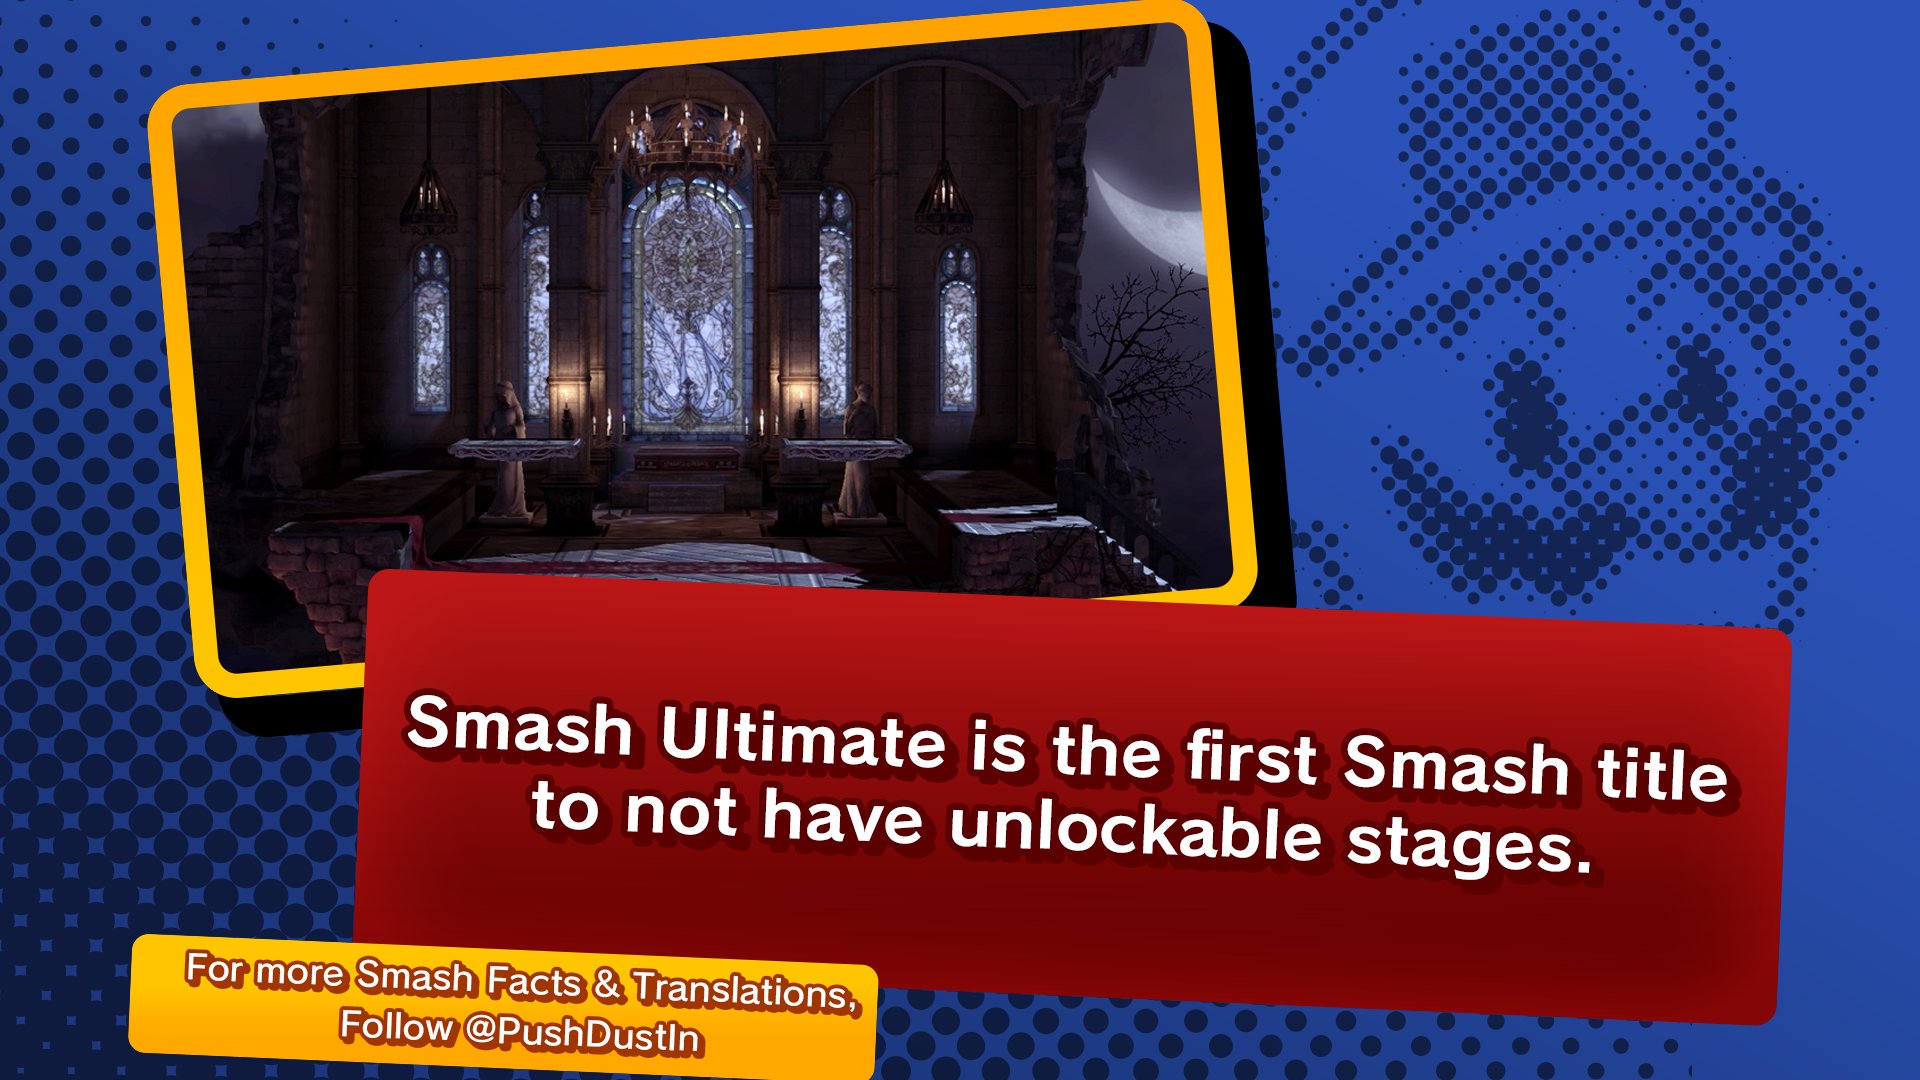 Pushdustin On Twitter So Much Room For Activities Smash Ultimate Is The First Smash Title To Not Have Unlockable Stages Smashbros Nintendo Pushfacts Https T Co Xtlmhnsttw